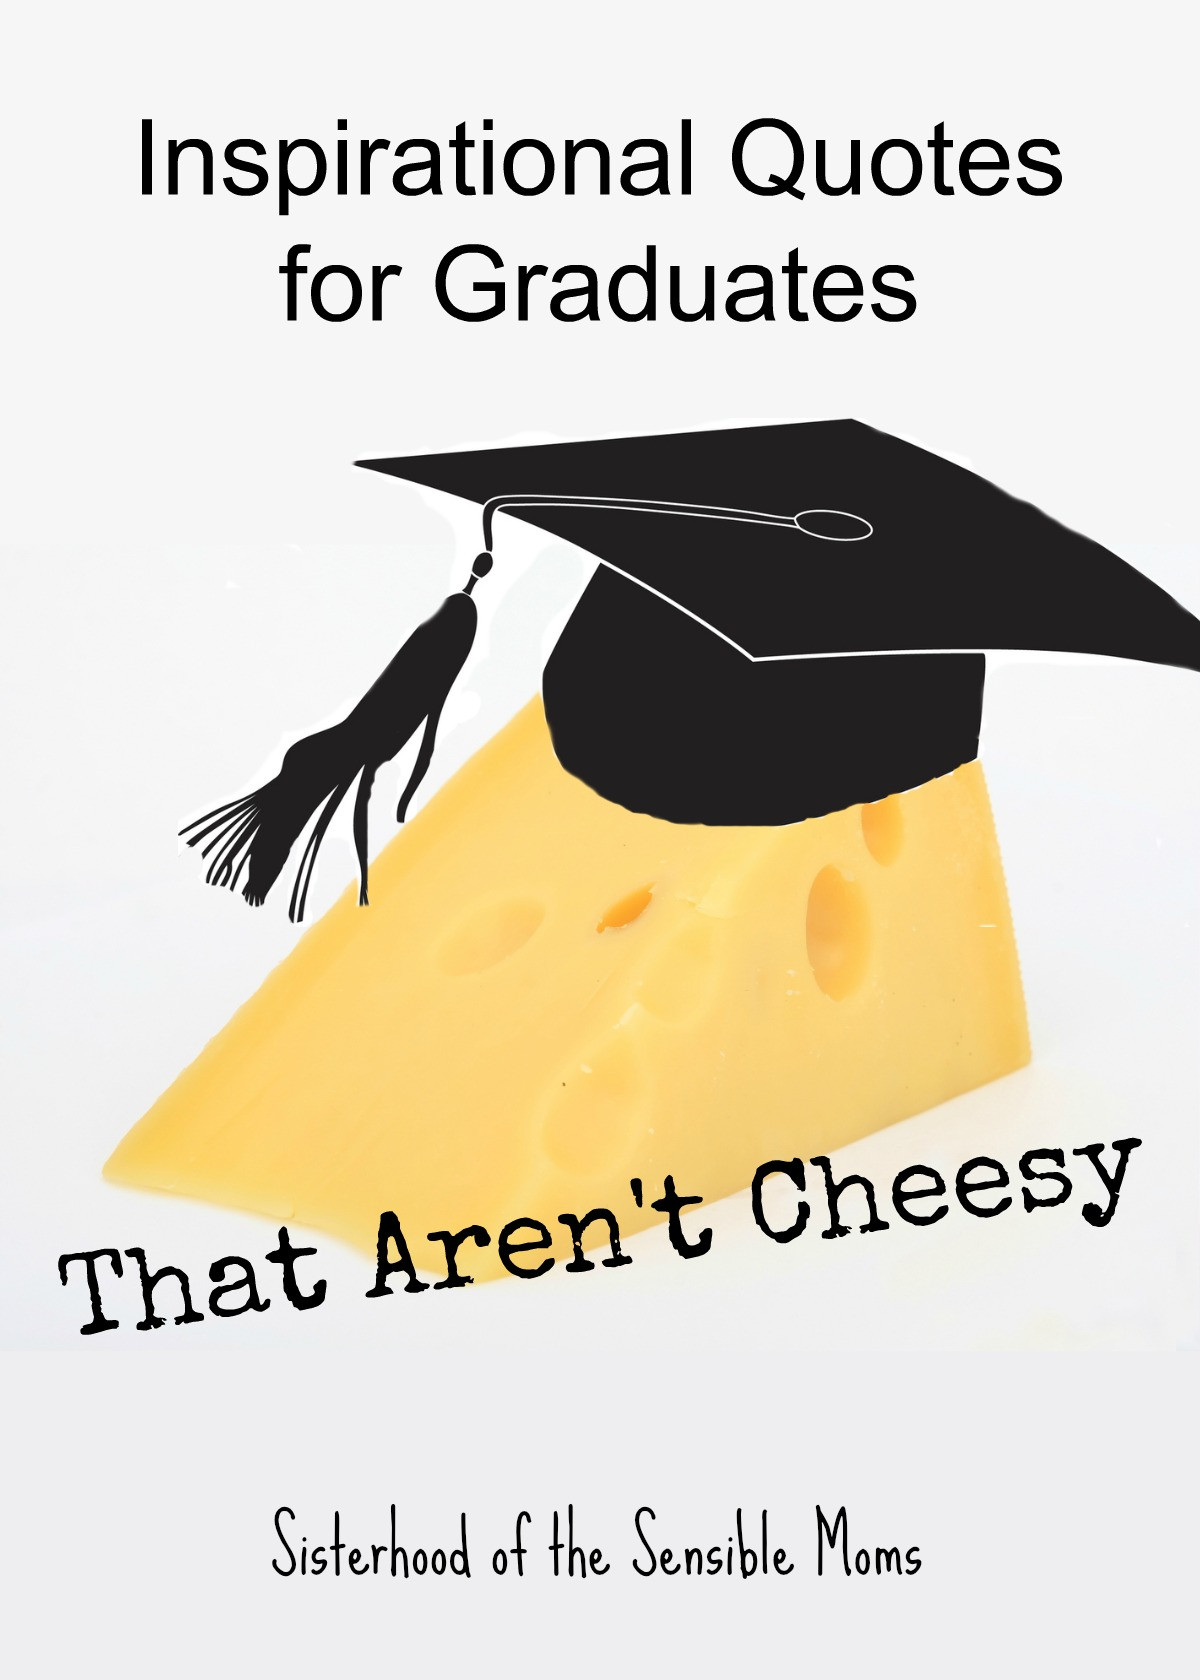 Quote For Graduation
 Inspirational Quotes for Graduates That Aren t Cheesy